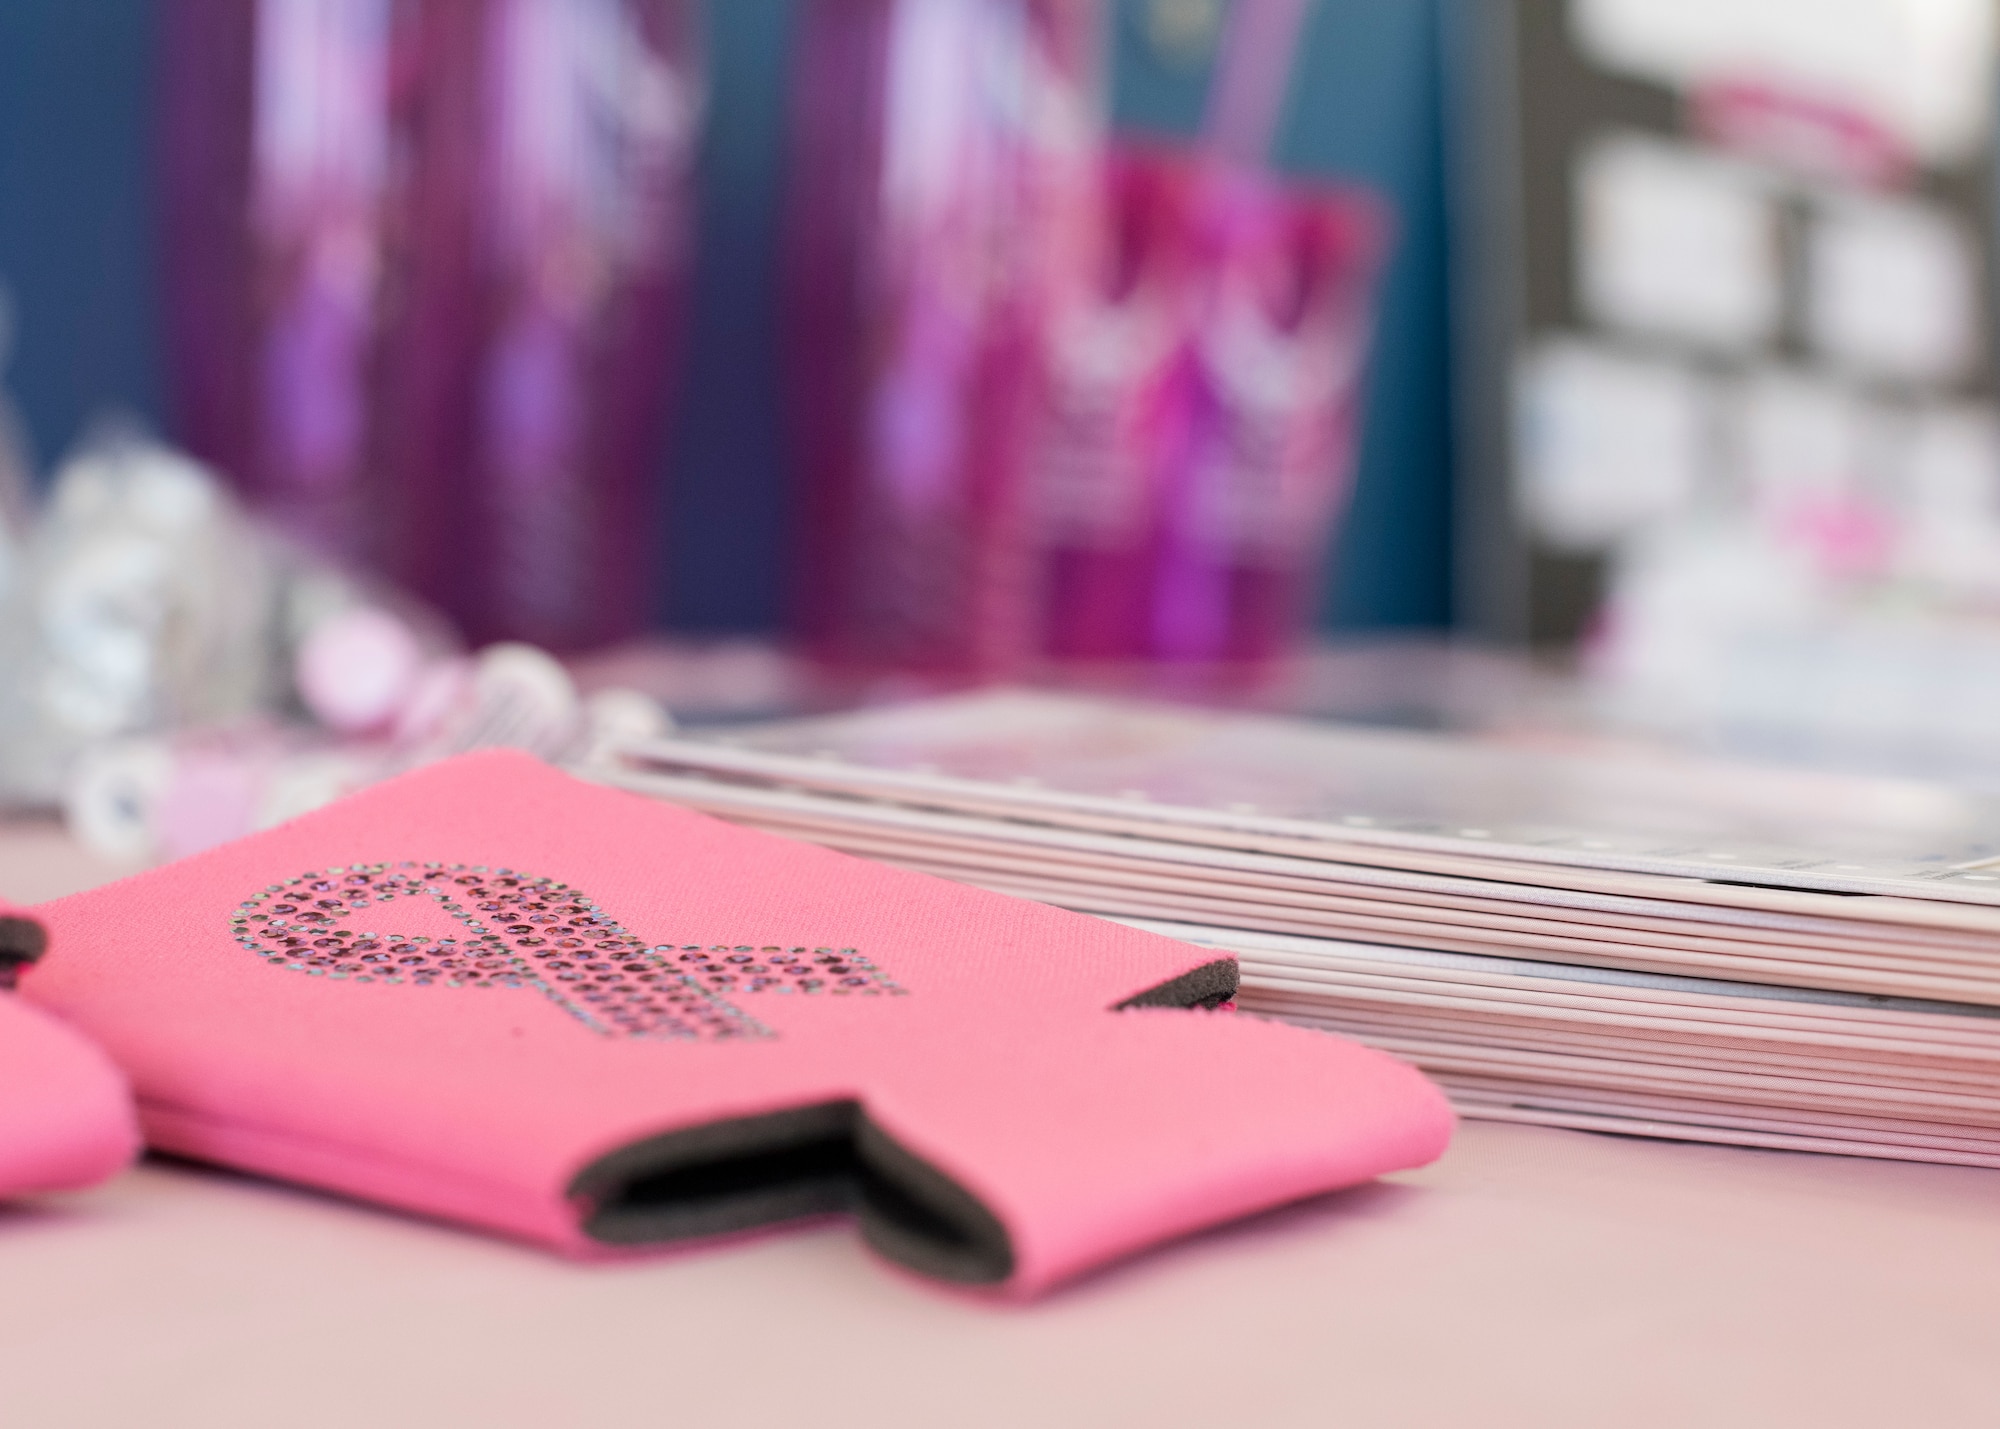 A pink drink sleeve is displayed during the 49th Medical Group’s Breast Cancer Awareness Month Celebration, October 25, 2018, at Holloman Air Force Base, N.M. The pink ribbon is an international symbol of breast cancer awareness, and represents moral support for those fighting breast cancer and breast cancer survivors. (U.S. Air Force photo by Staff Sgt. BreeAnn Sachs)